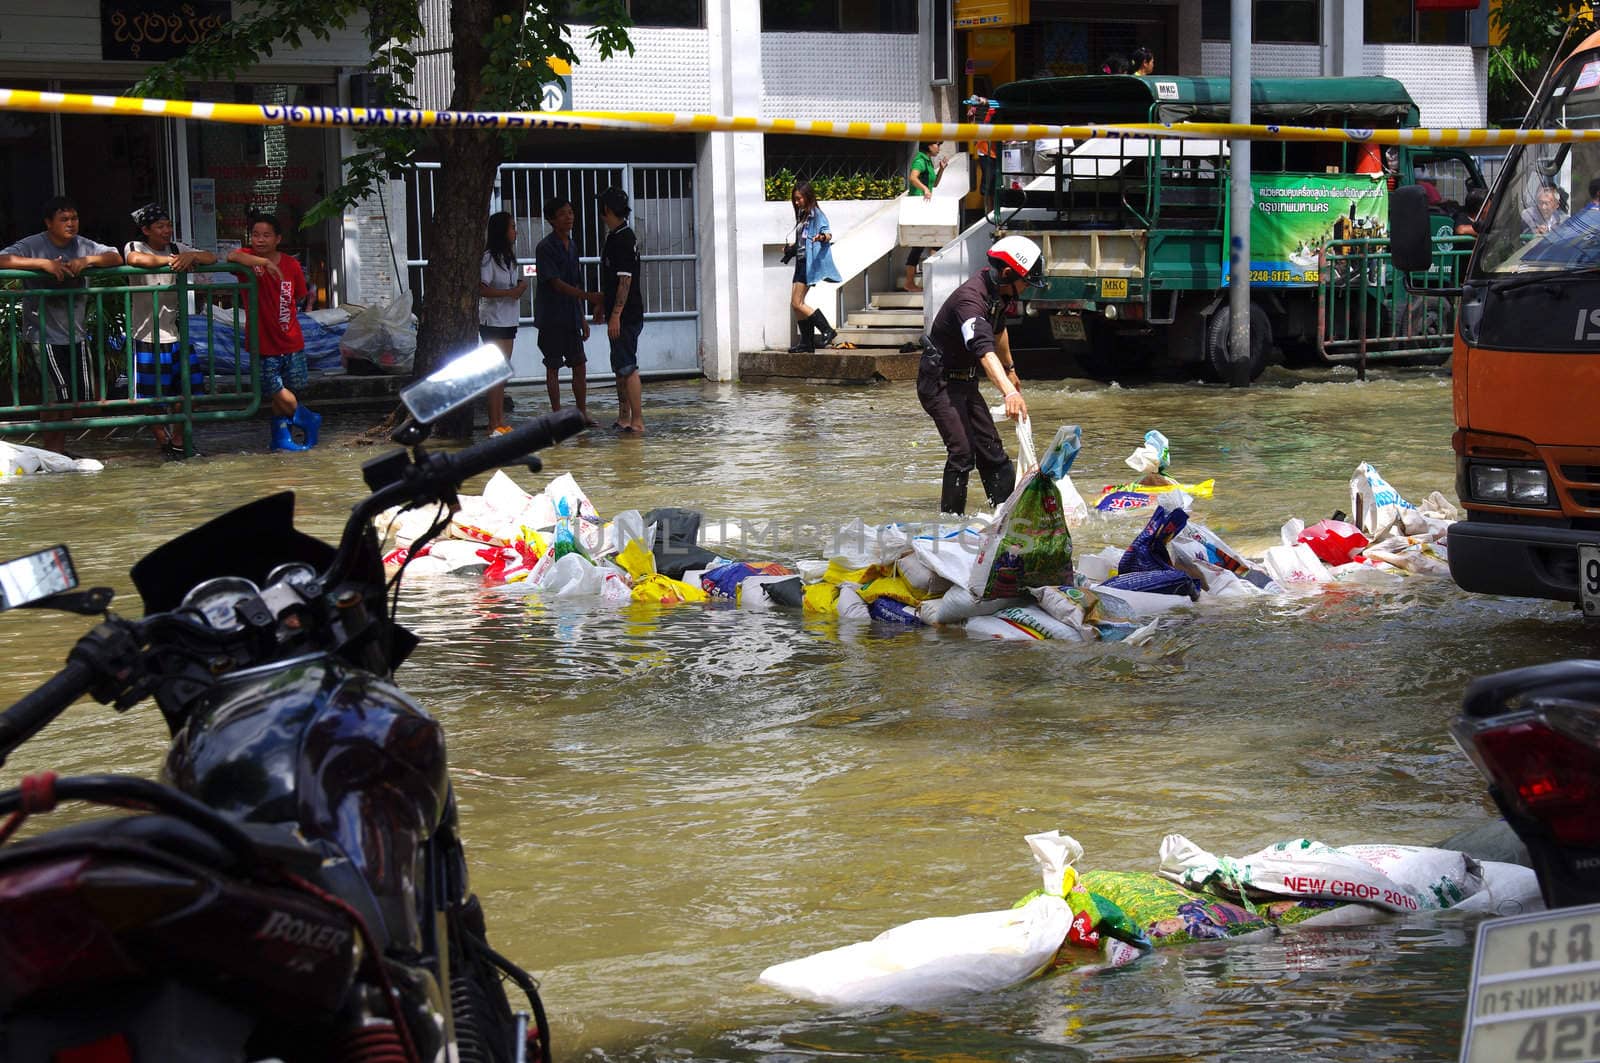 BANGKOK - OCT 30: Unidentified residents of Bangkok's Samsen road  Dusit district make their way through flooded streets after the Chao Phraya River bursts its banks on Oct 30, 2011 in Bangkok, Thailand.